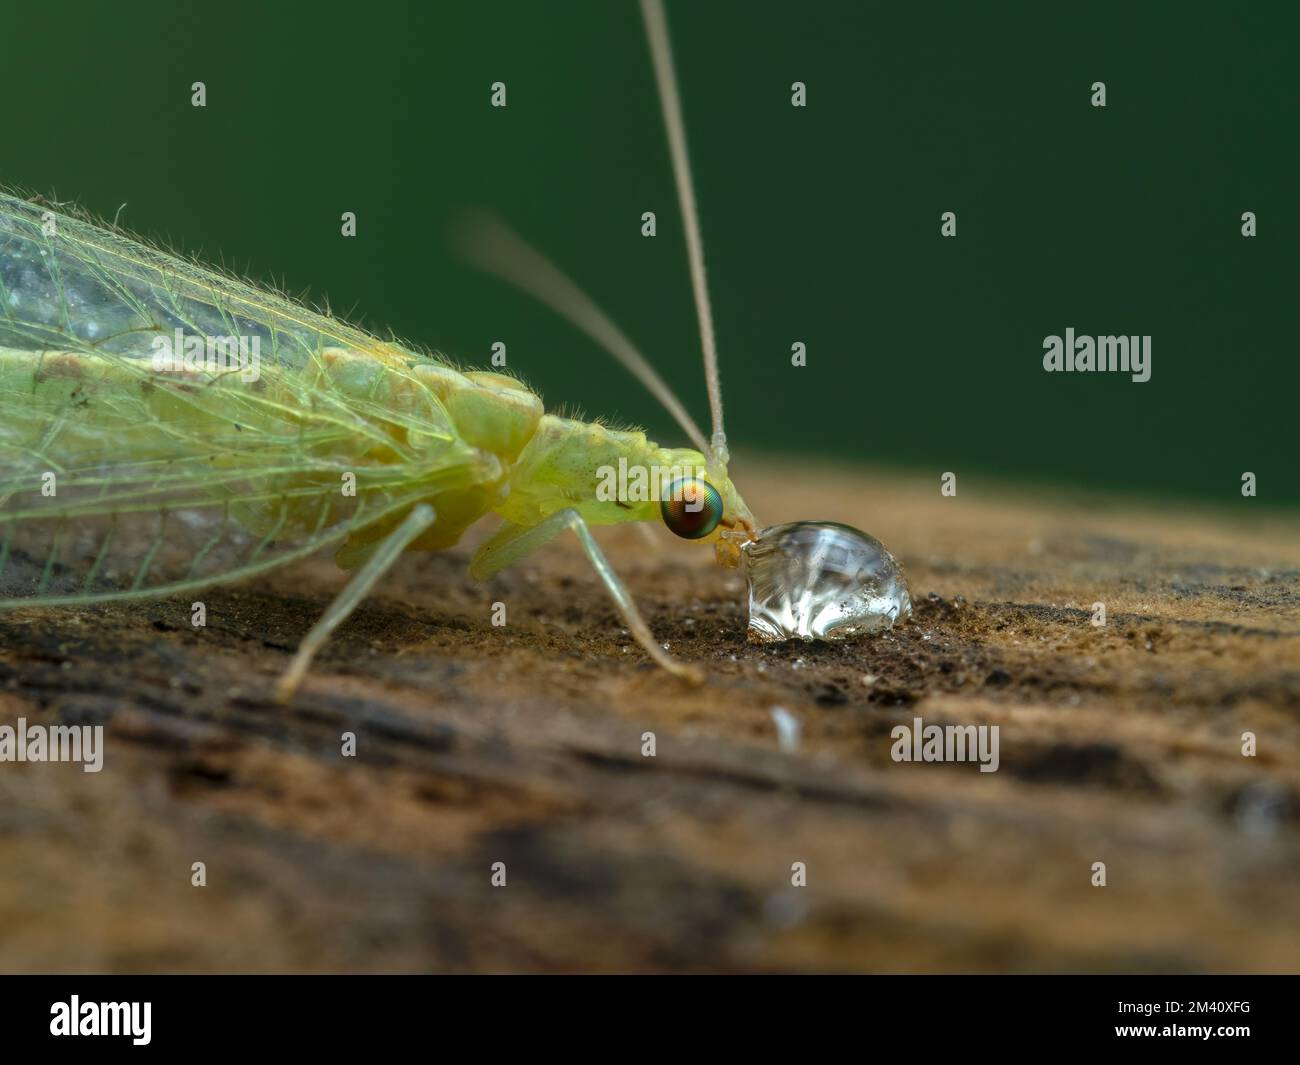 Close-up of image of a pretty green lacewing, family Chrysopidae, drinking a drop of honey Stock Photo